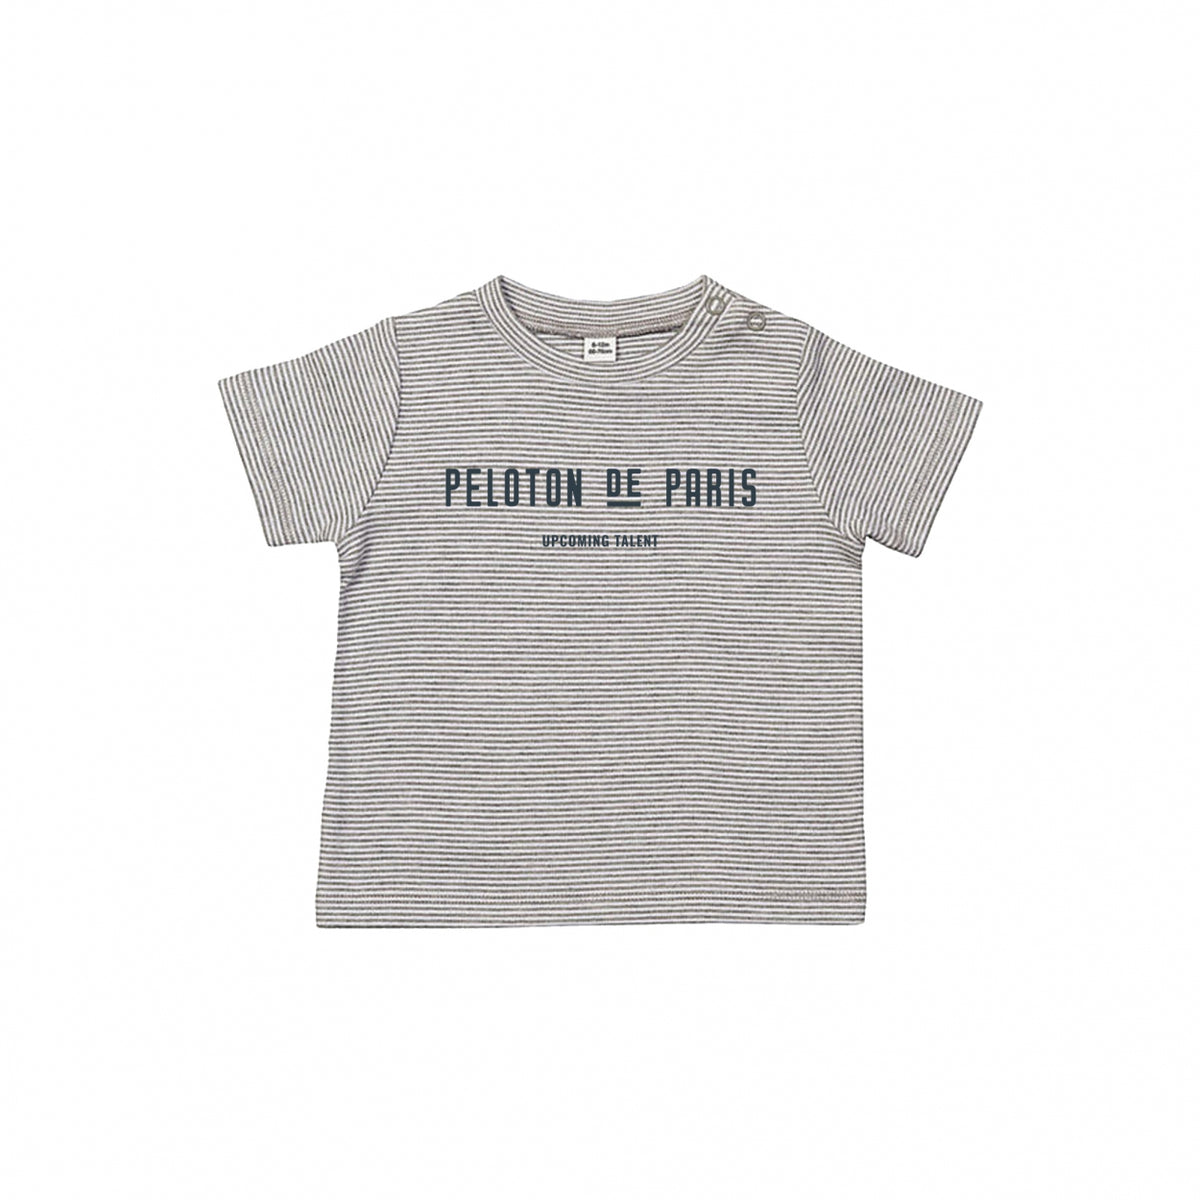 Upcoming Talent&#39; Baby T-Shirt | Striped Grey